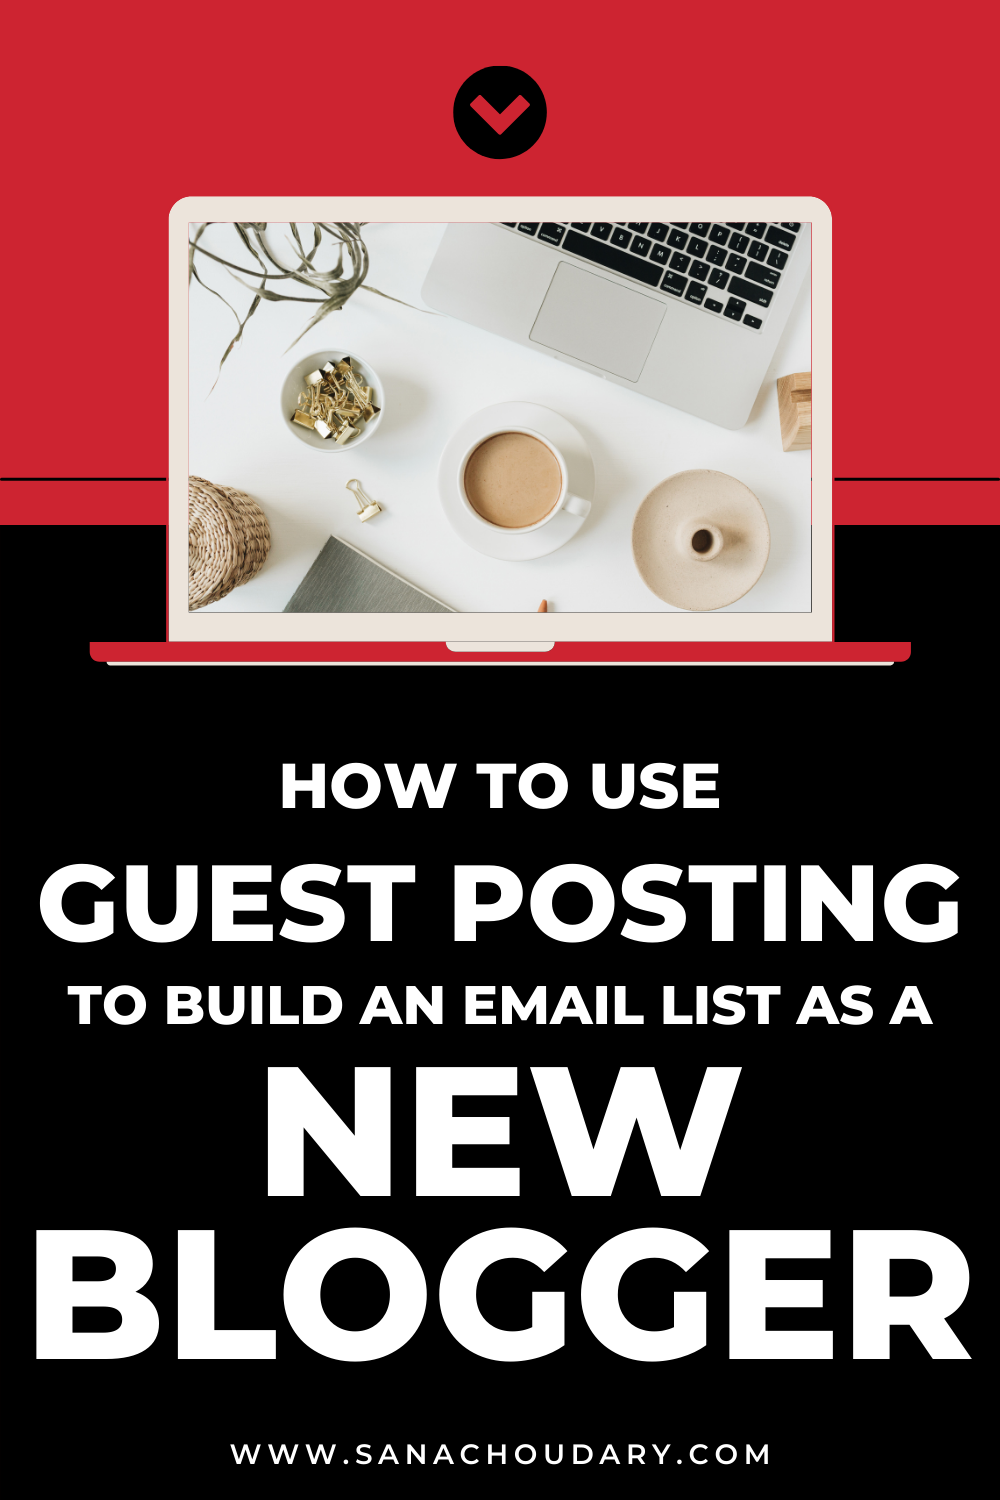 How to Use Guest Posting to Build Your Email List as a New Blogger 